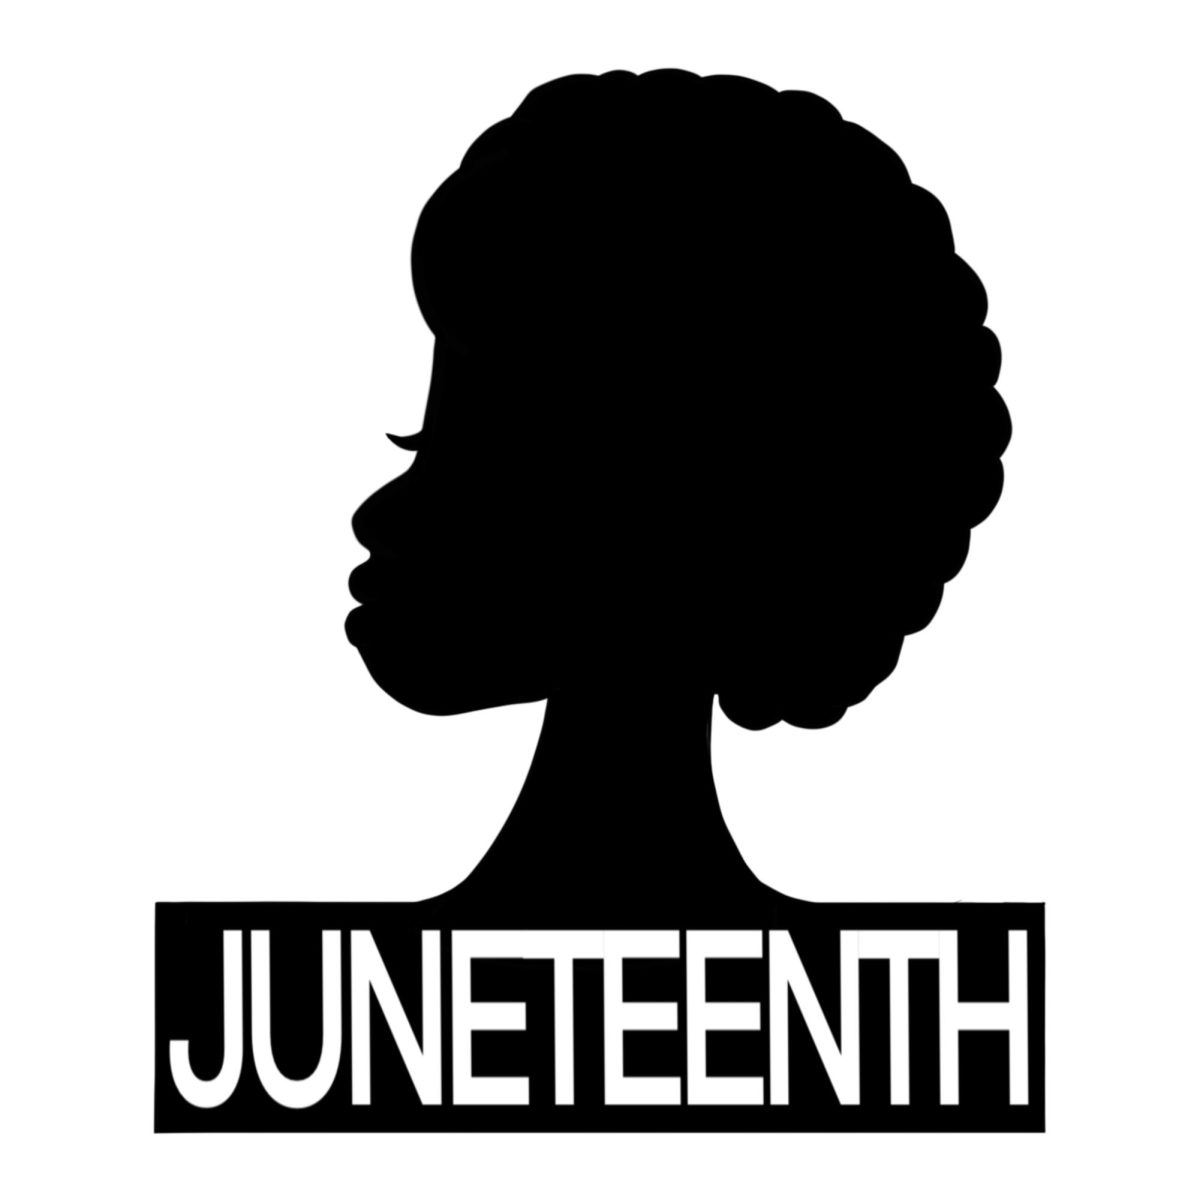 Juneteenth+is+Far+More+than+Just+a+Holiday